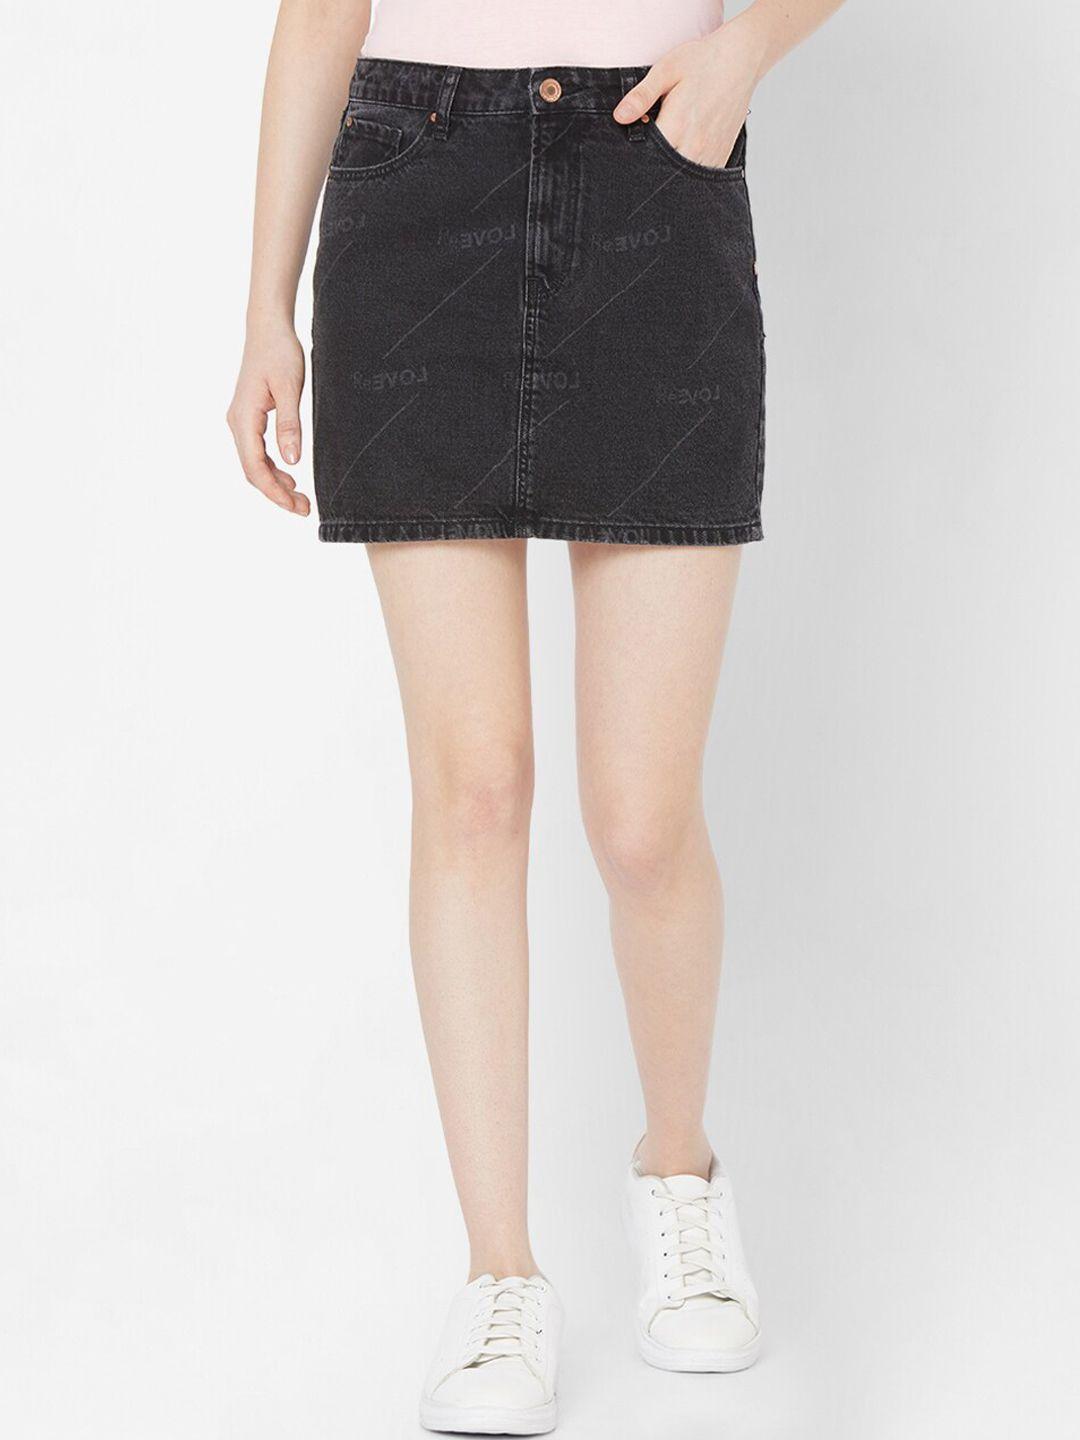 spykar-black-solid-relaxed-mid-rise-pure-cotton-denim-skirts